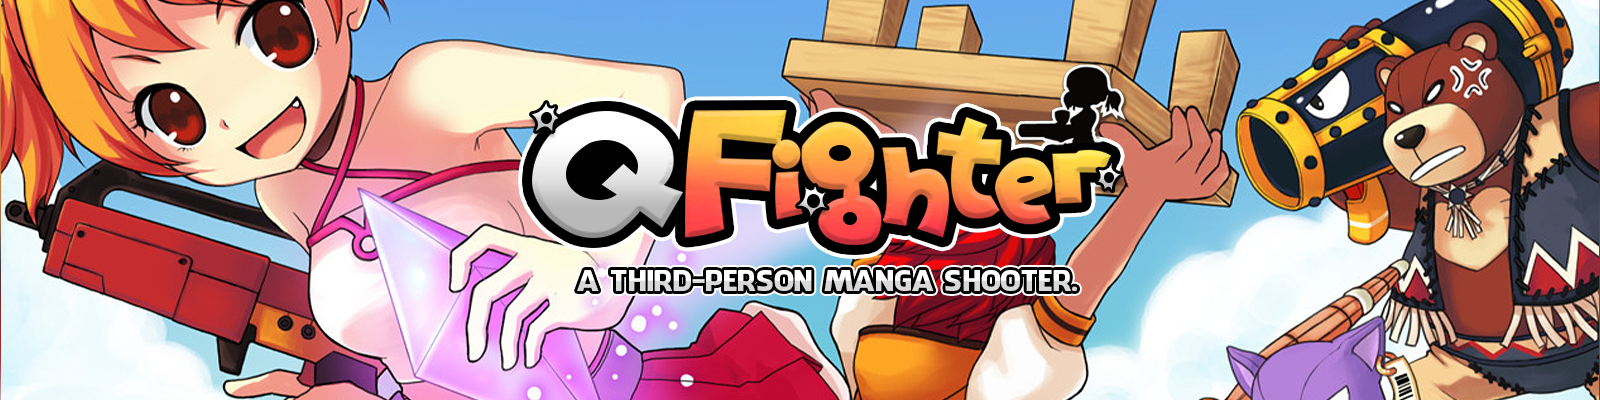 qfighter_homepage_banner